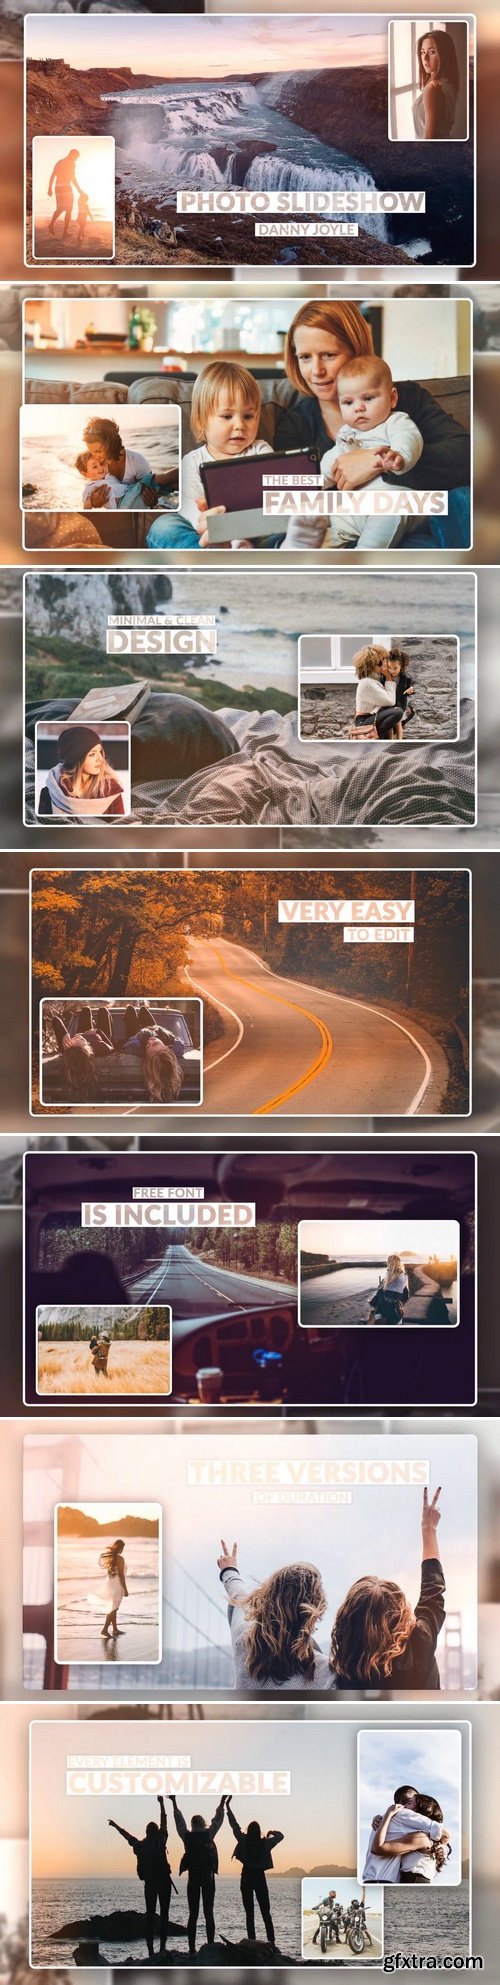 MA - Photo Slideshow After Effects Templates 156565